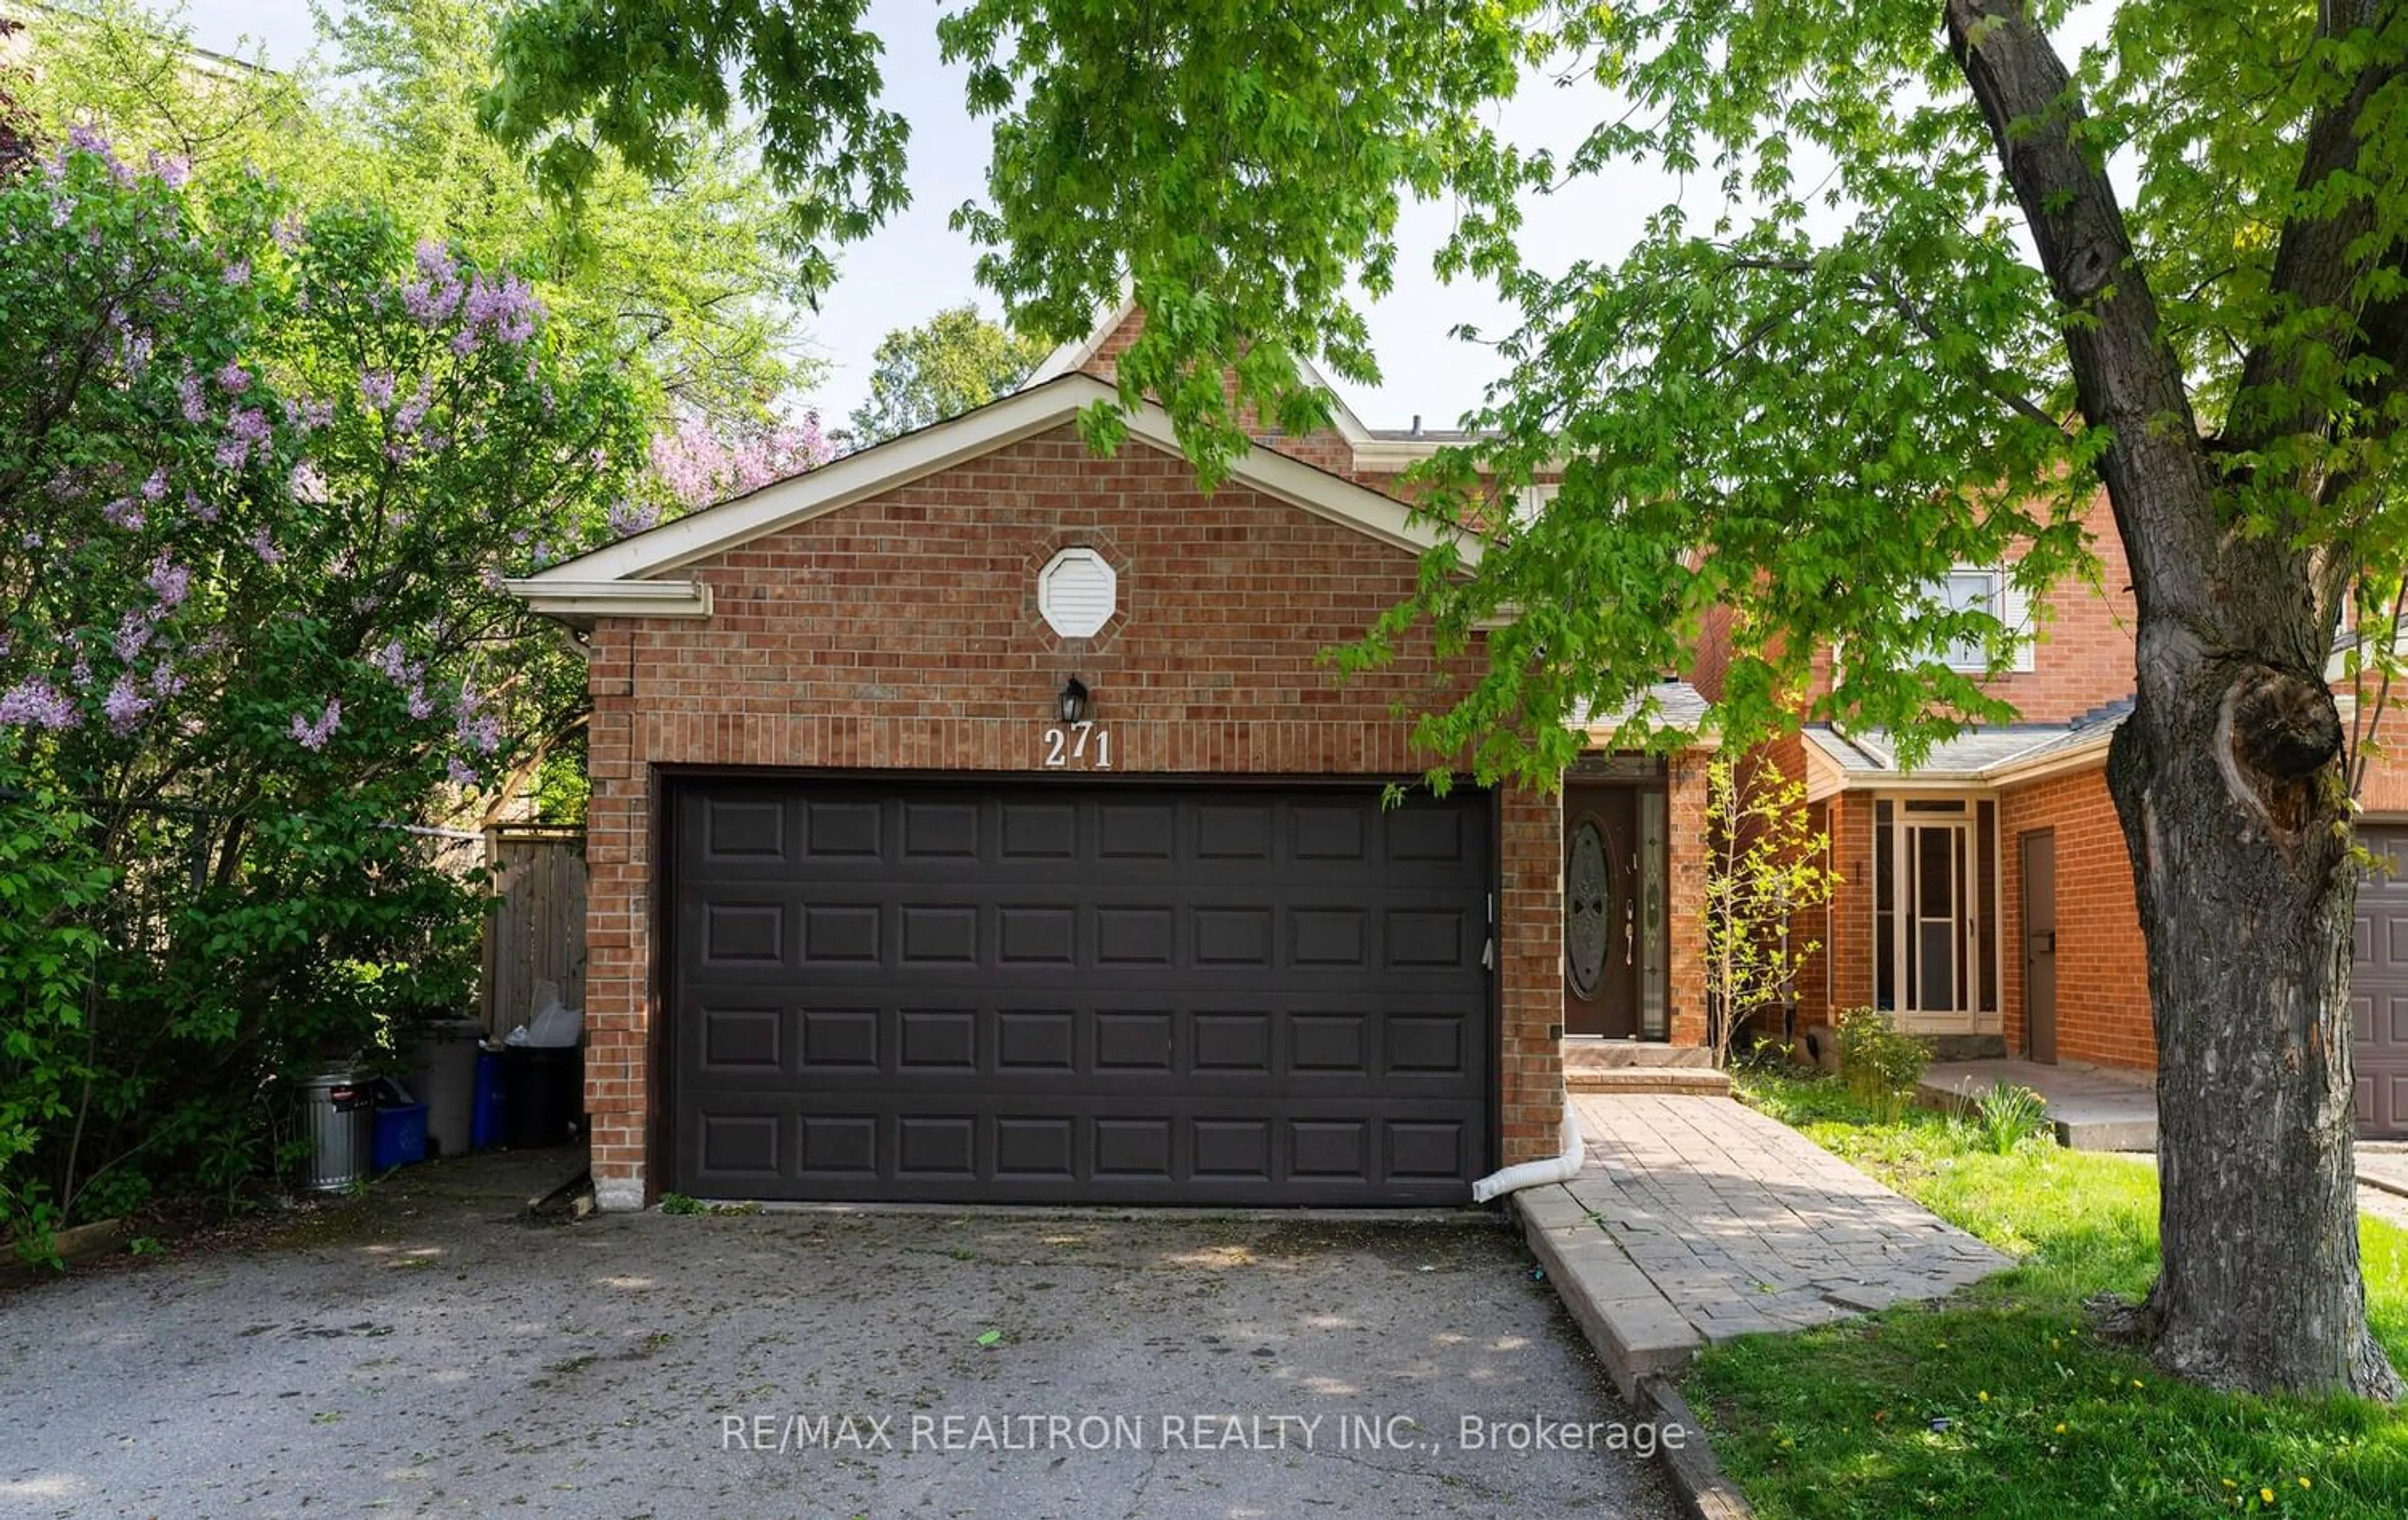 Home with brick exterior material for 271 Mullen Dr, Vaughan Ontario L4J 2V8